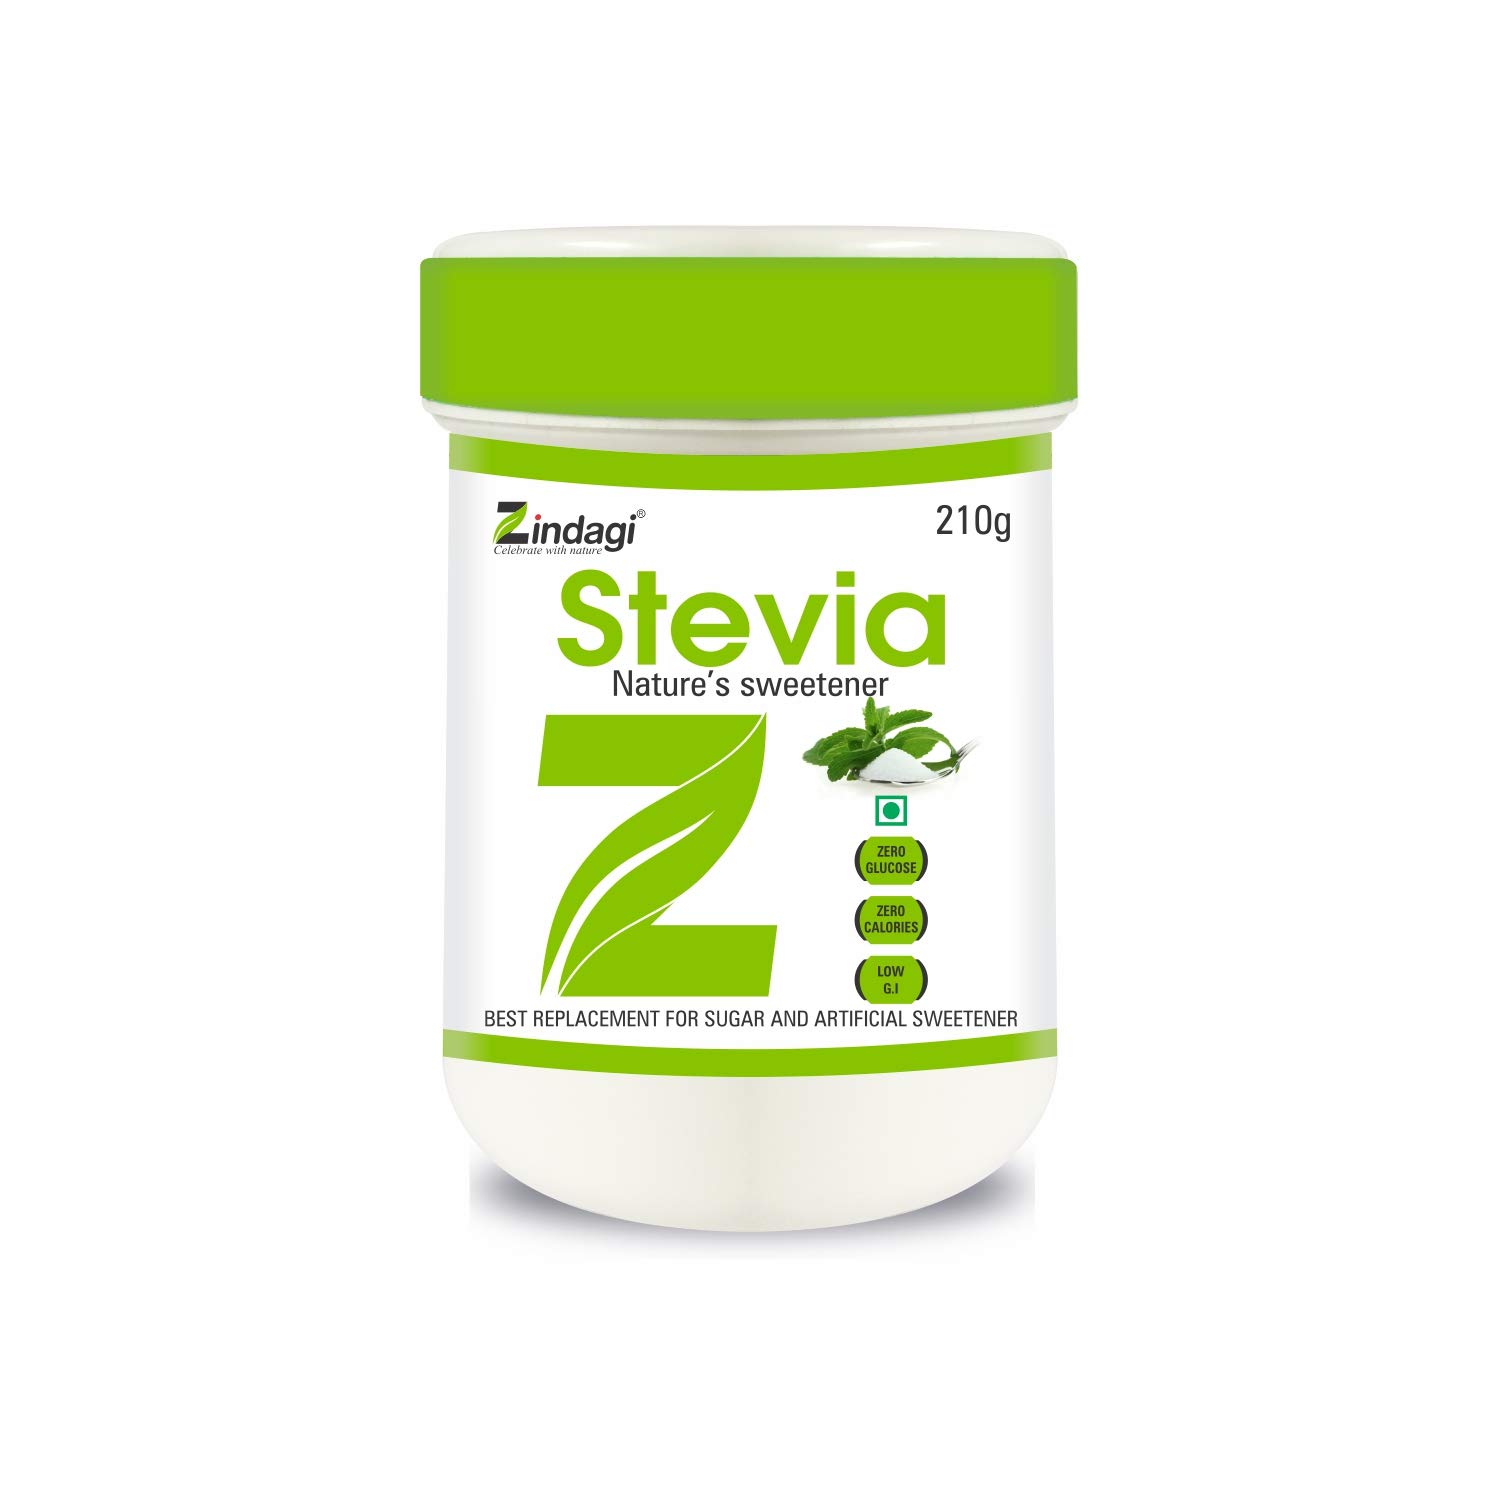 Buy Zindagi Stevia Powder - Natural Stevia Spoonable White Powder Extract - Sugar-Free - Special Discount Offer For Few Days (200+10 GM Free Of Cost) at Best Price Online